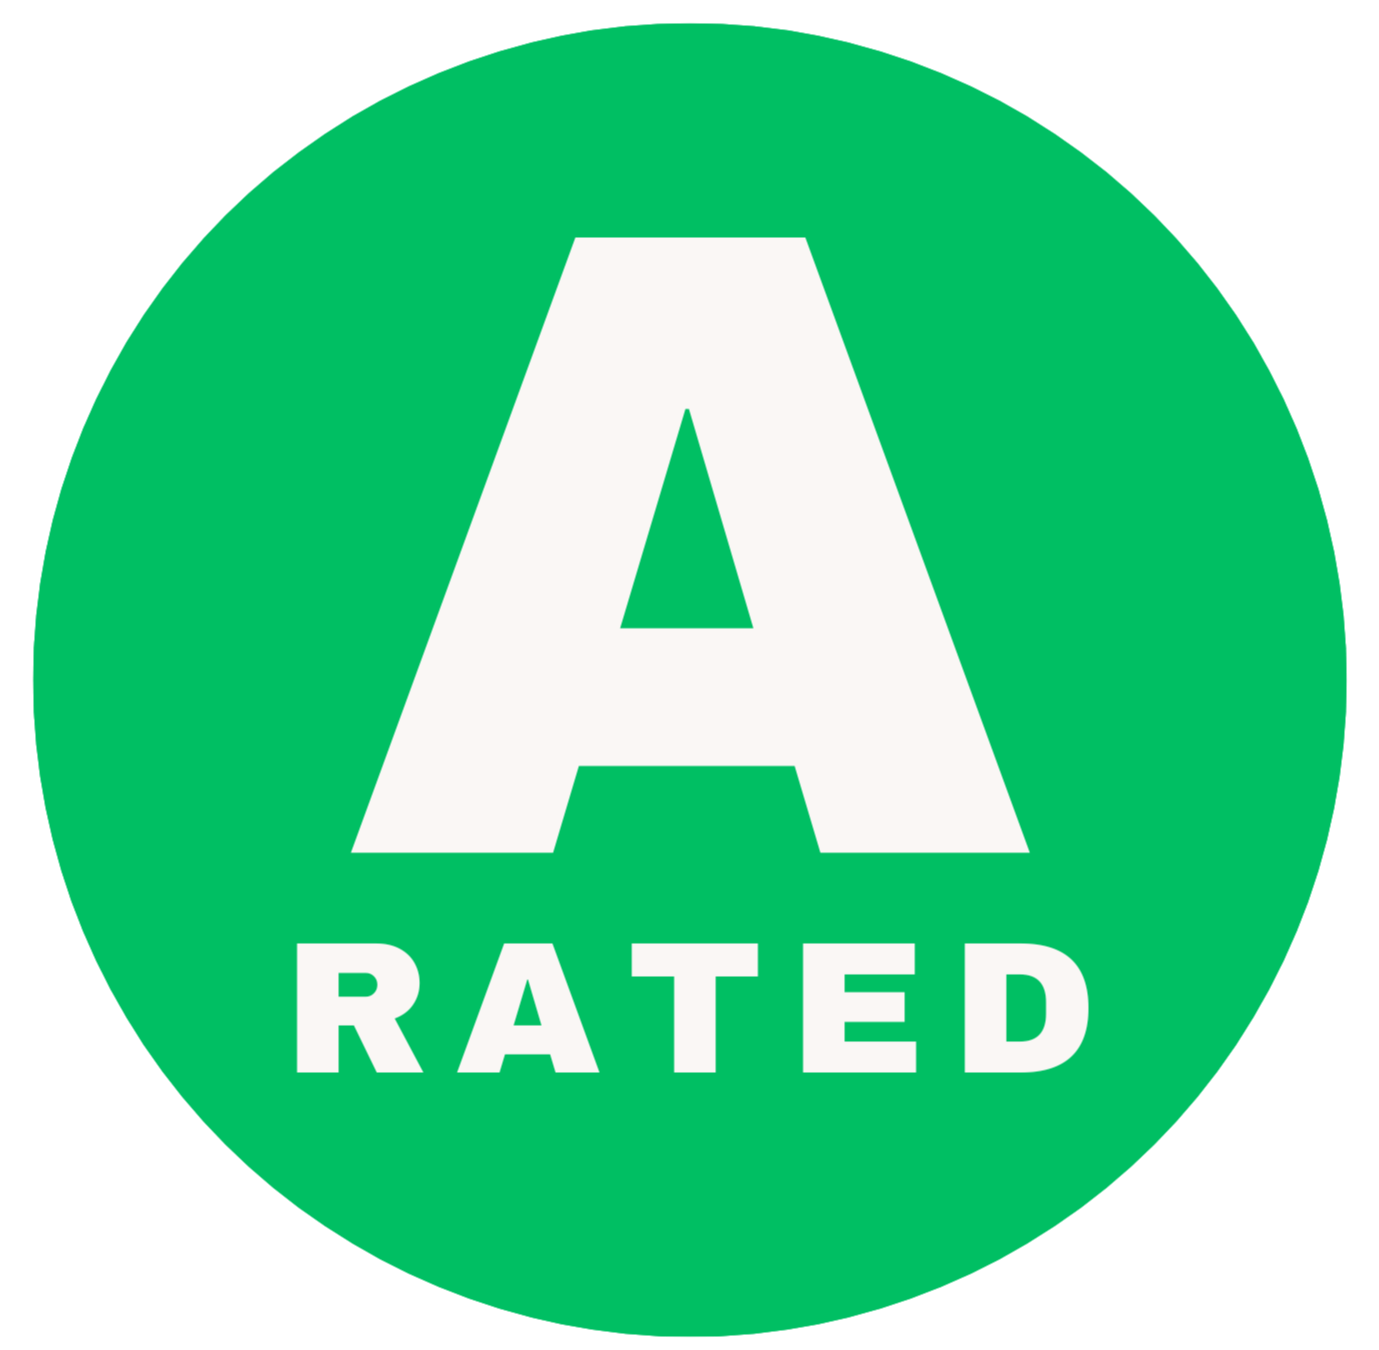 A RATED